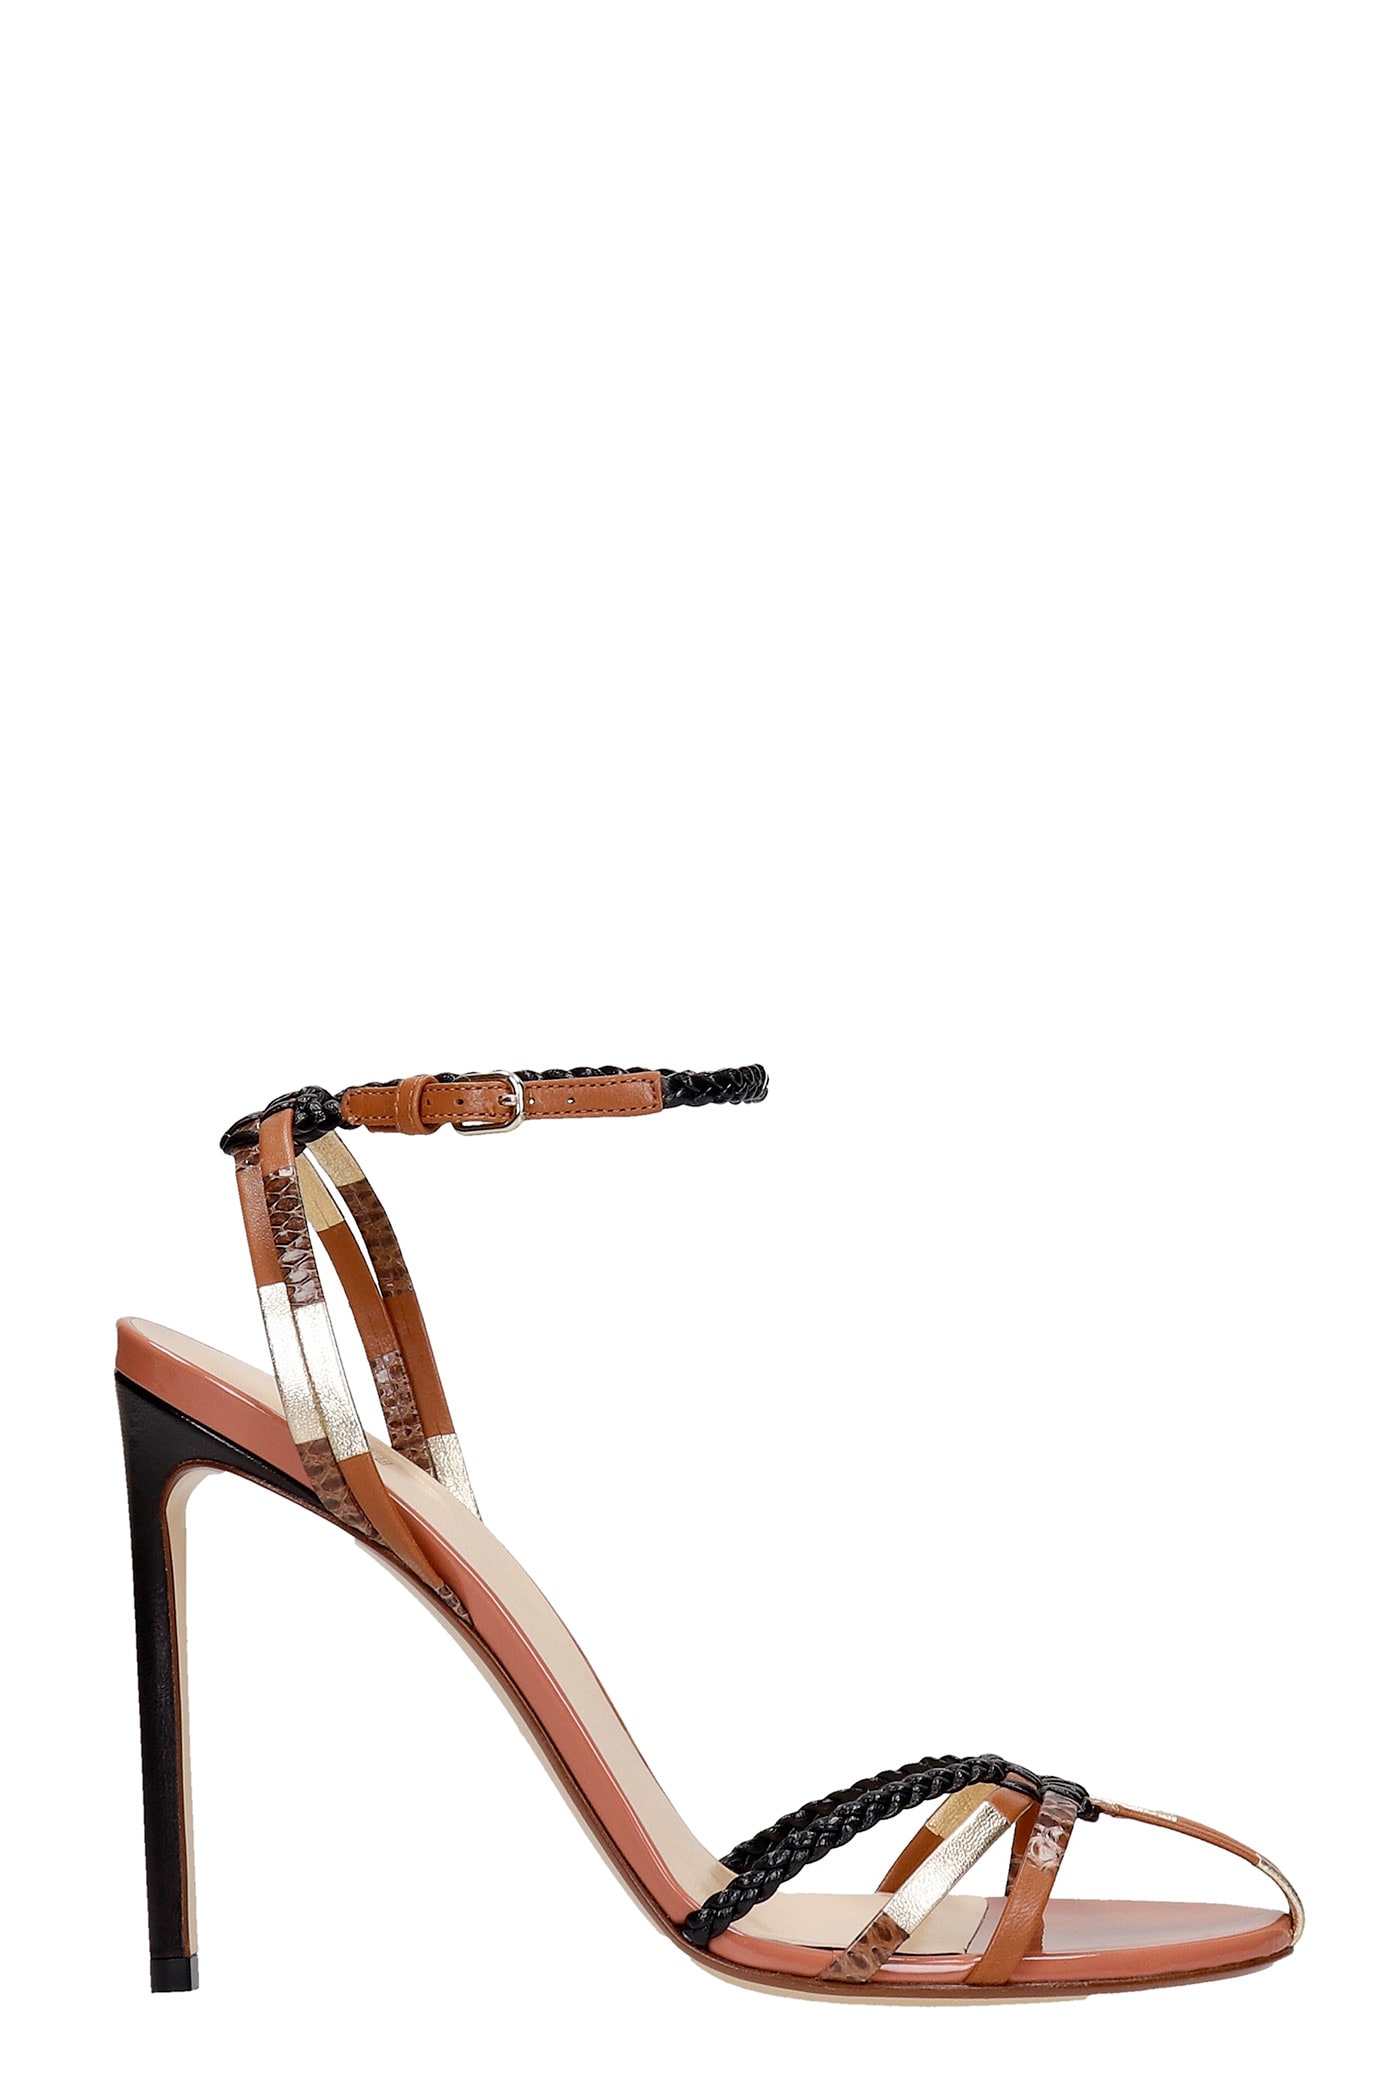 Buy Francesco Russo Sandals In Leather Color Leather online, shop Francesco Russo shoes with free shipping